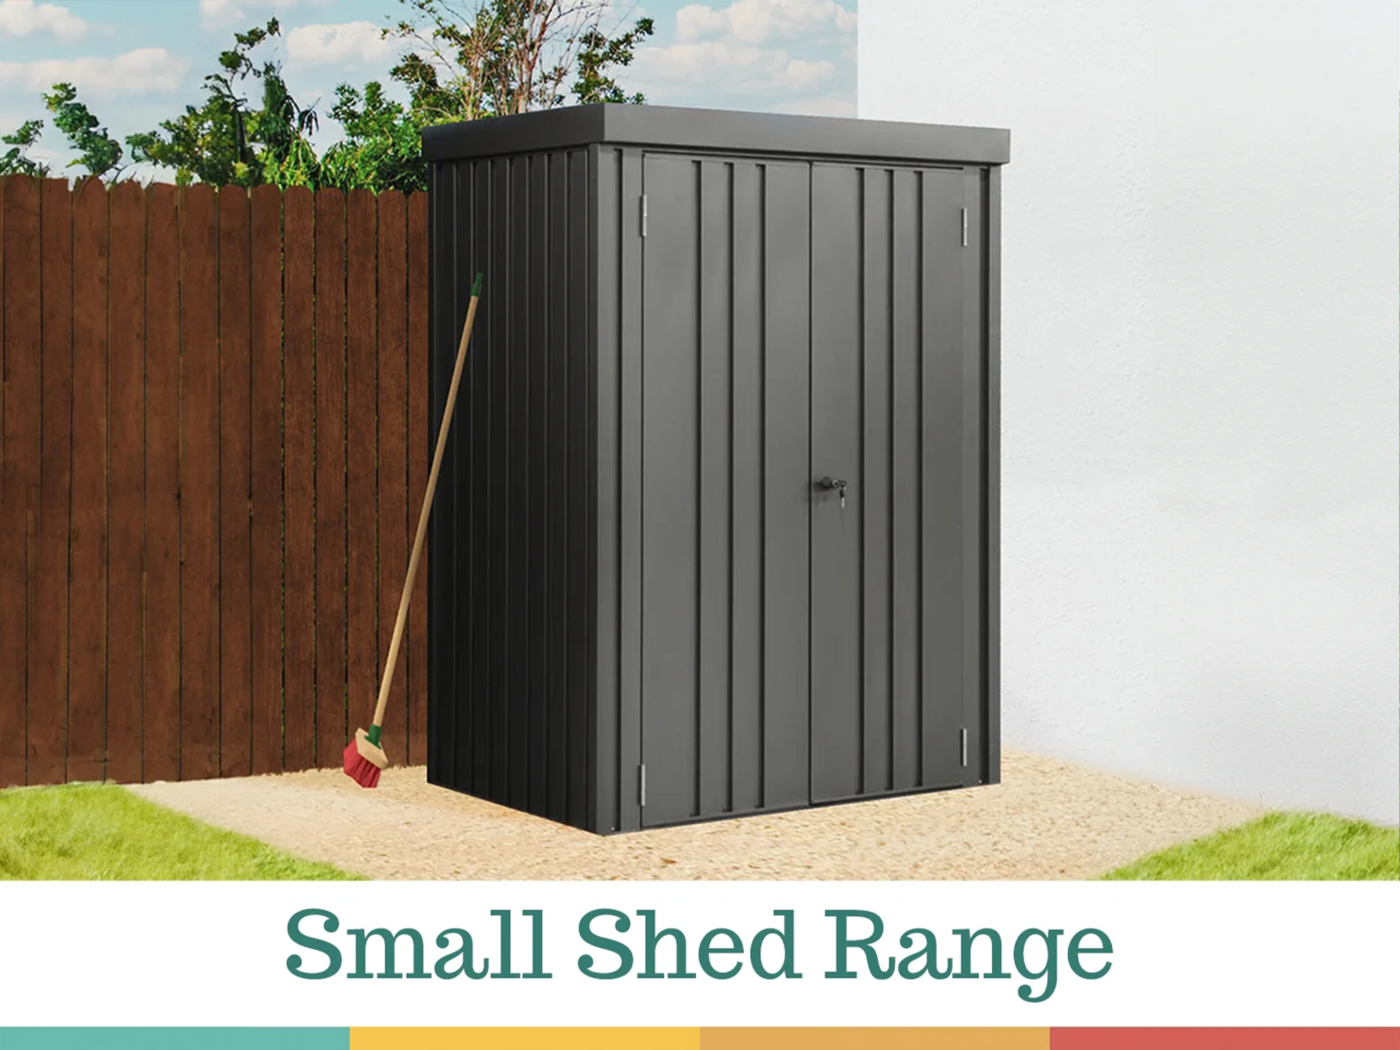 The small shed range